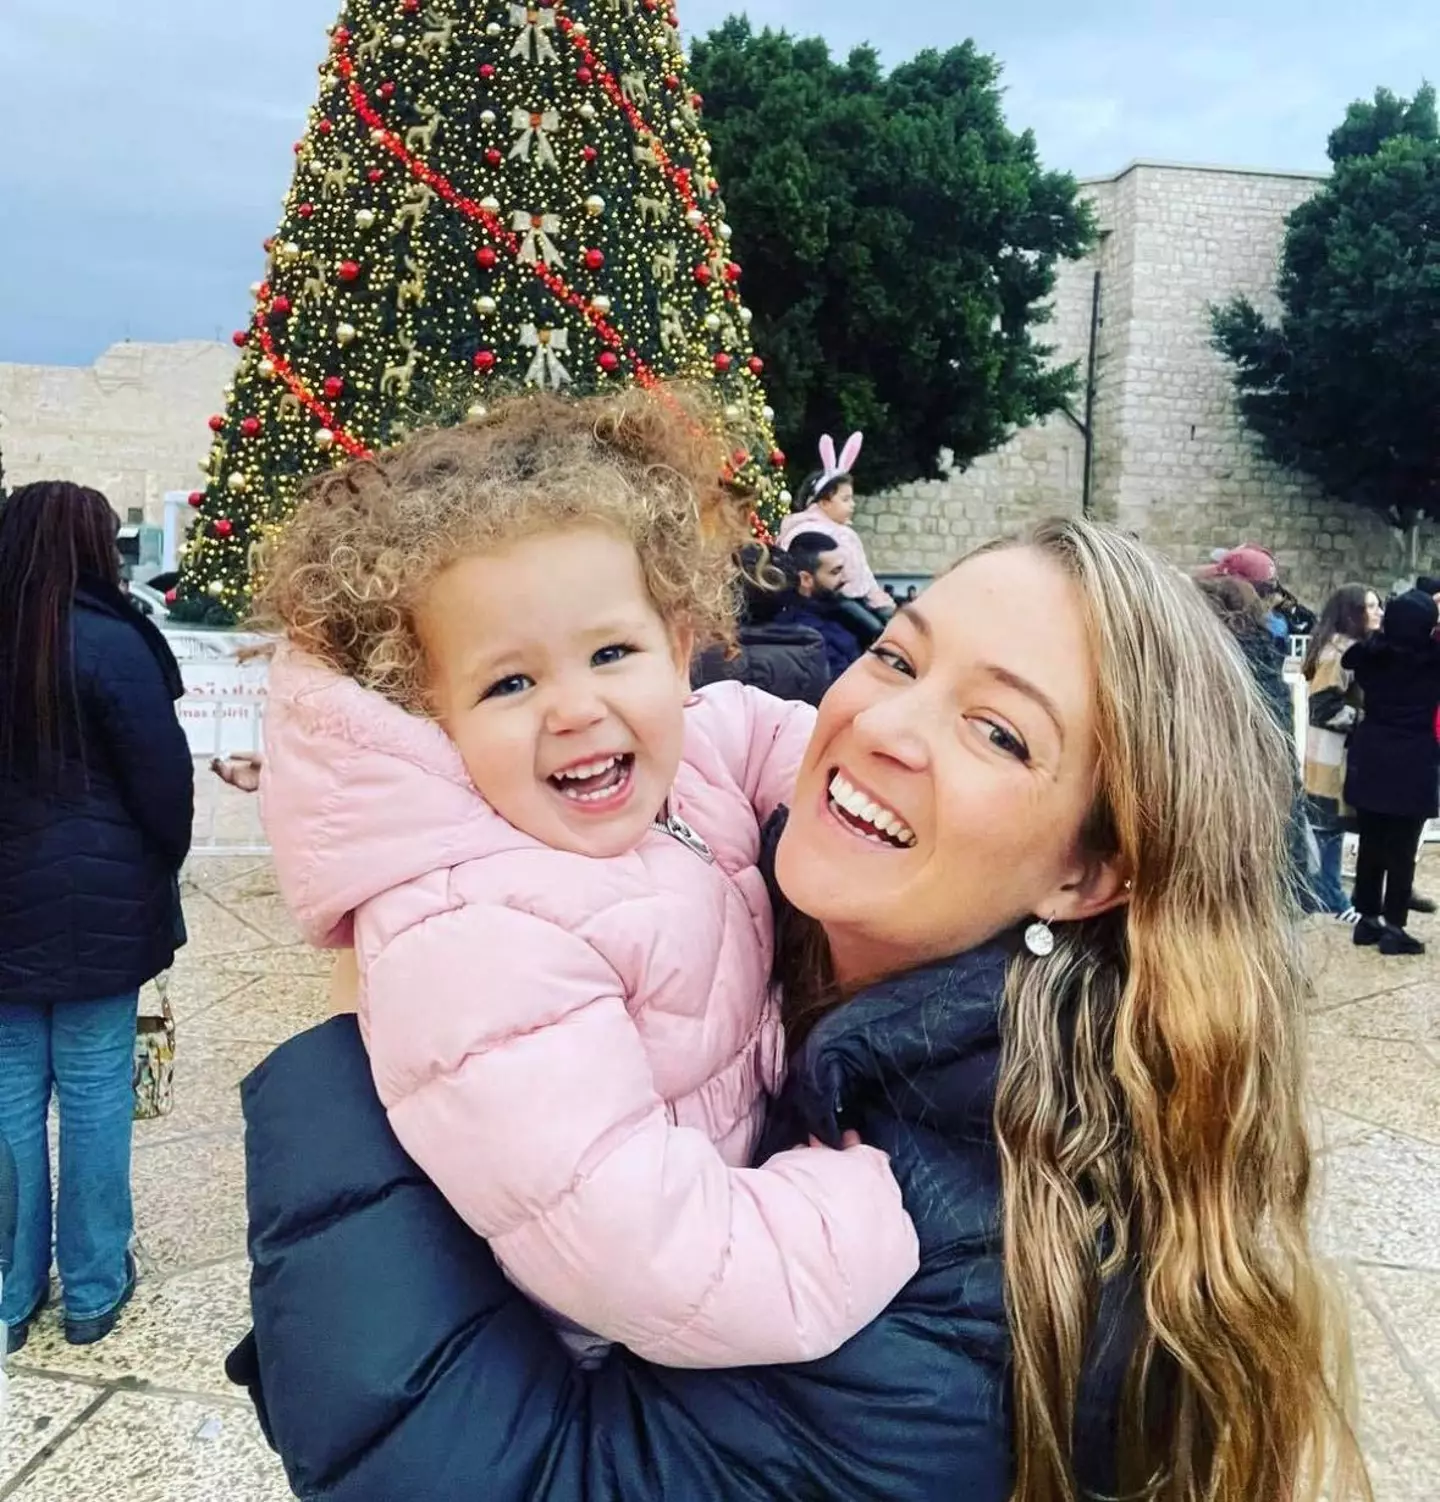 Ally and Aurelia at Christmas in Israel.